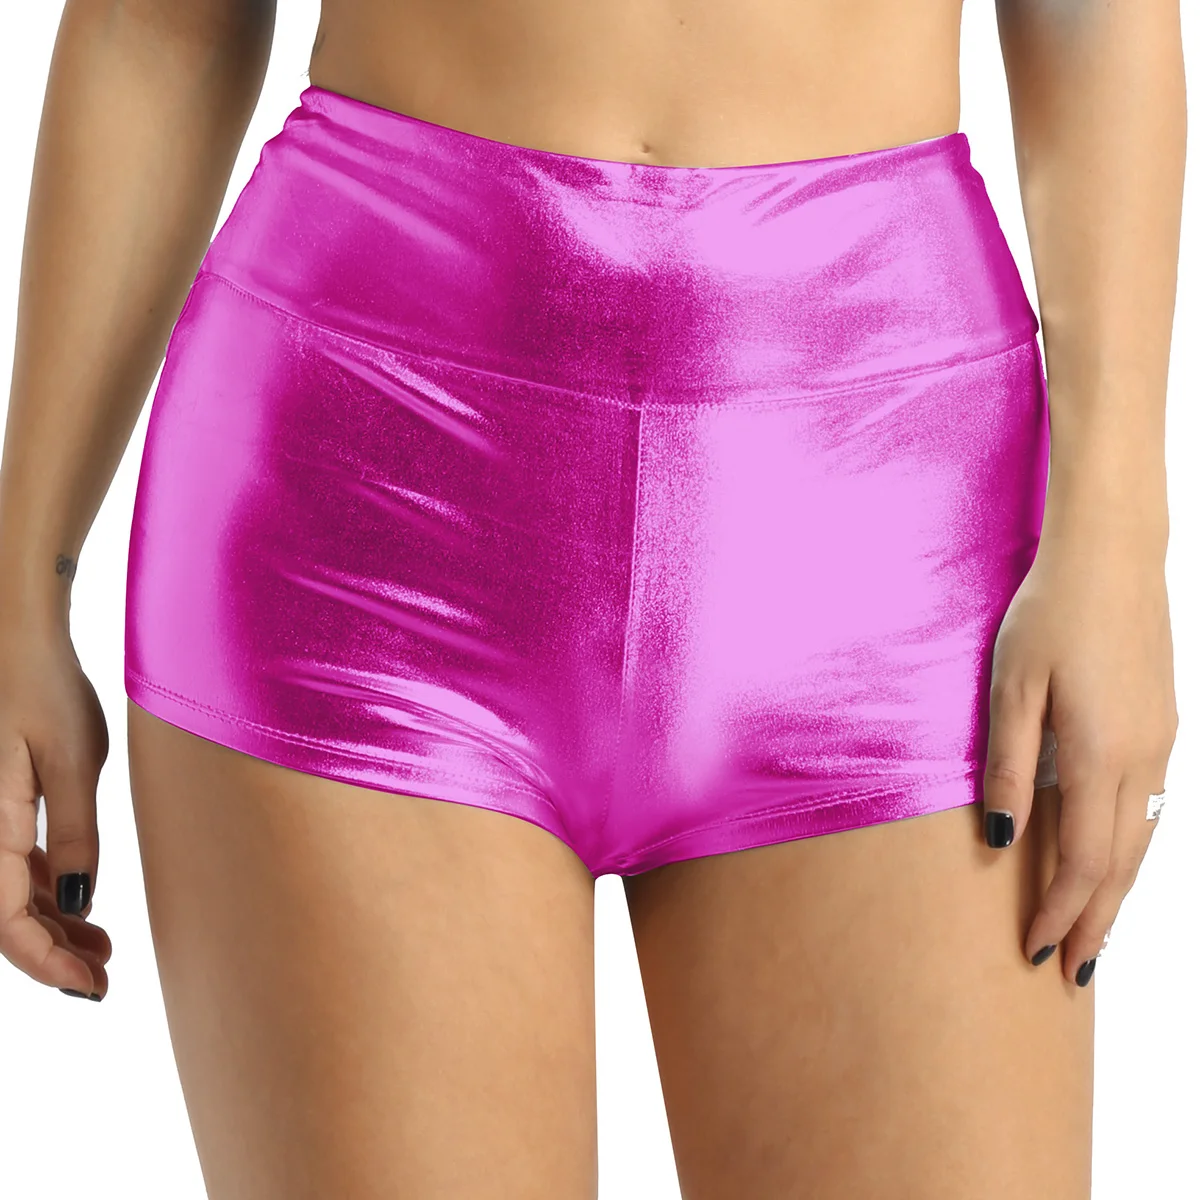 Women's Pole Dance Shorts Rave Clothes Shiny High-waisted Pole Dance Gymnastics Workout Rave Clothing Shorts Bottoms for Sports